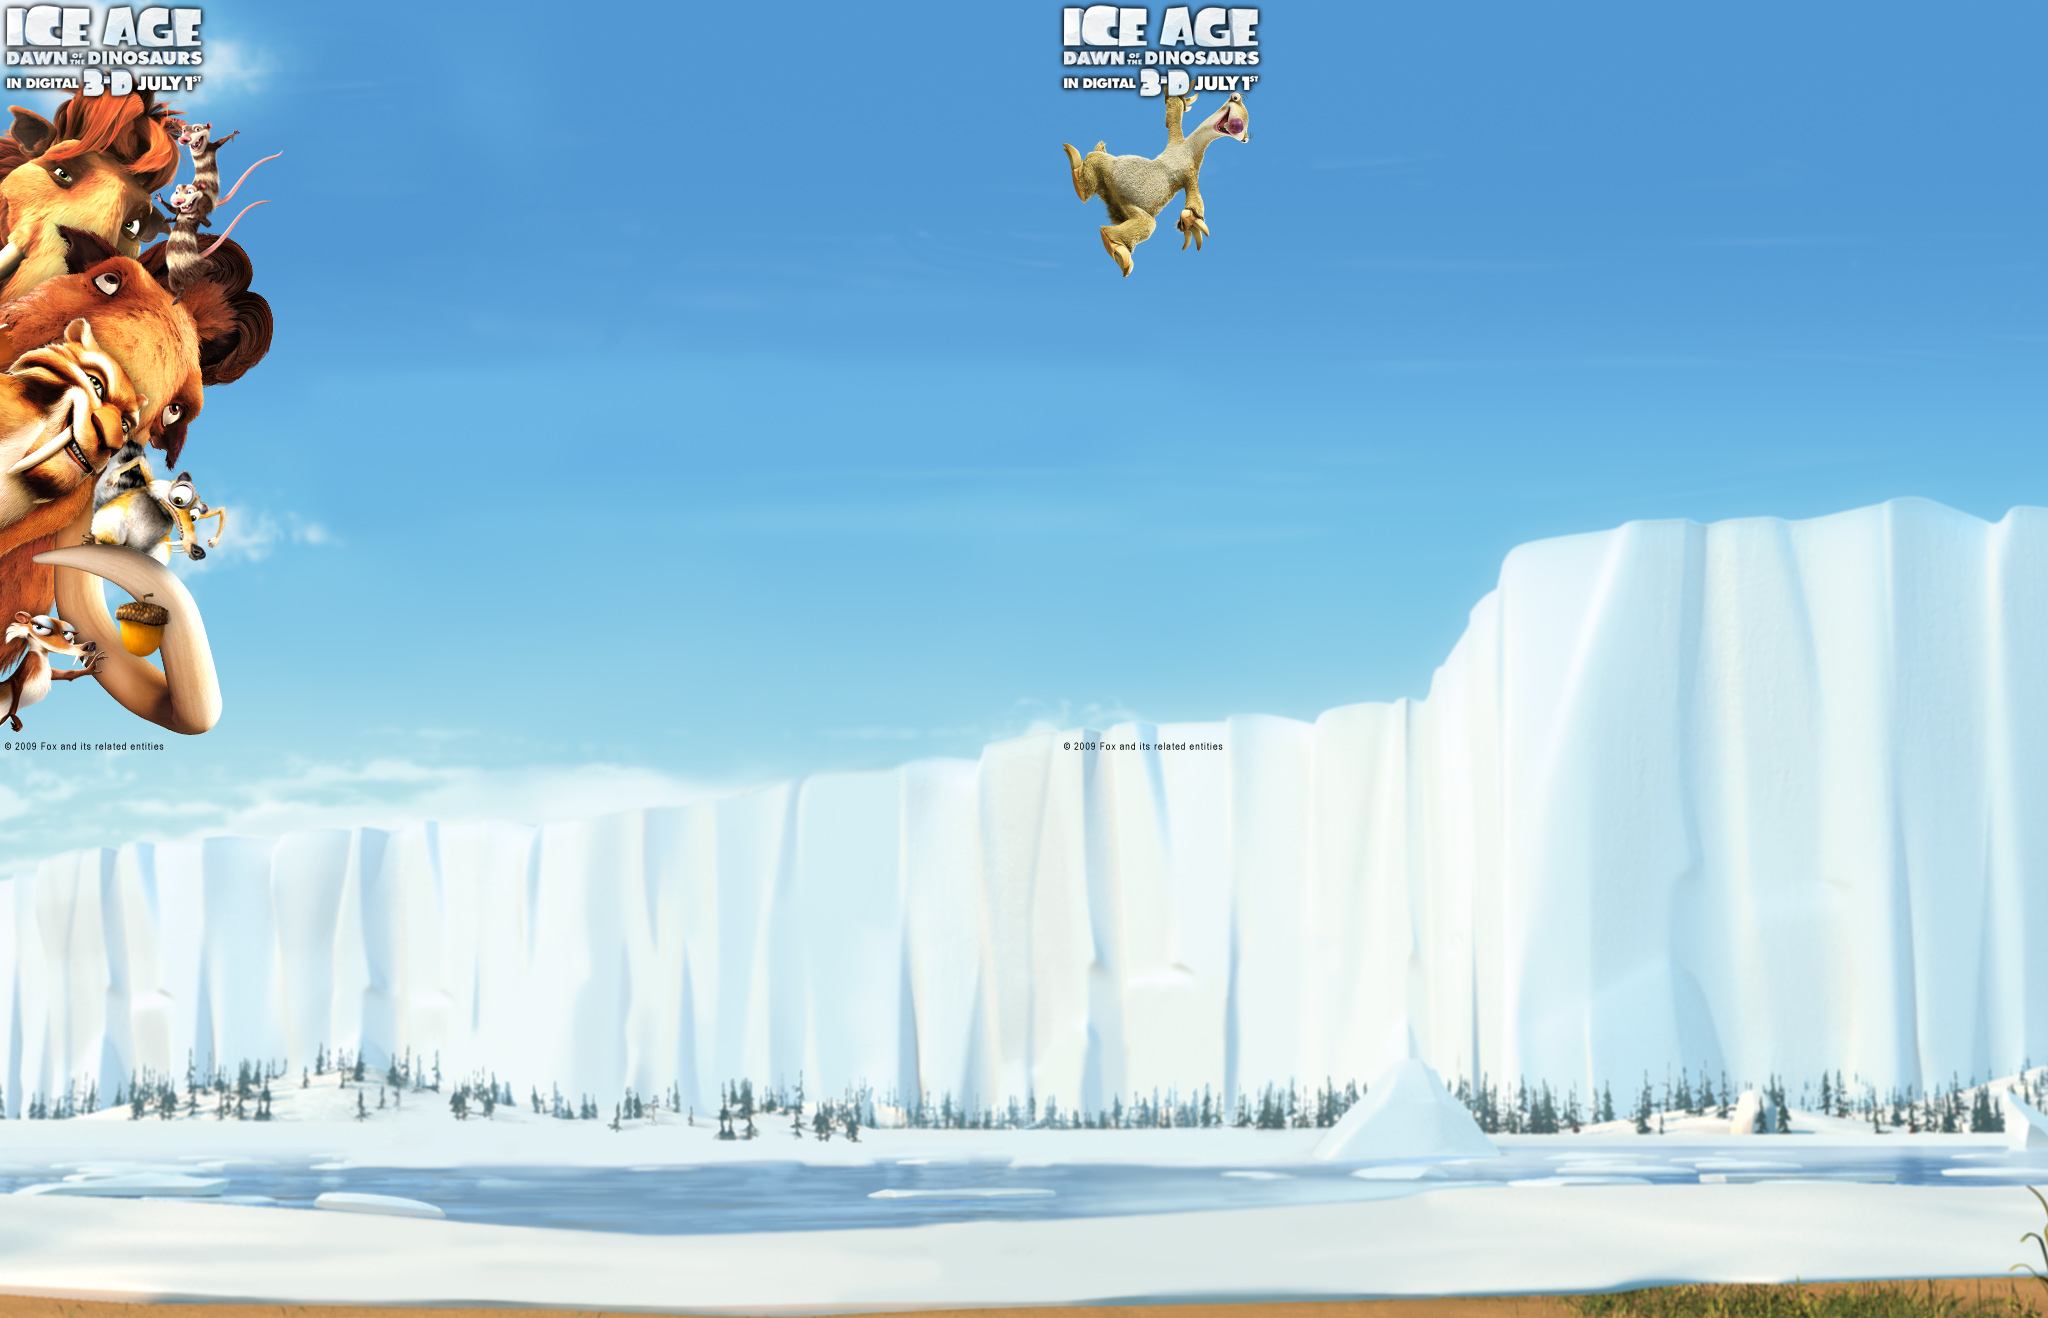 Ice World of Ice Age 3 wallpaper   Click picture for high resolution